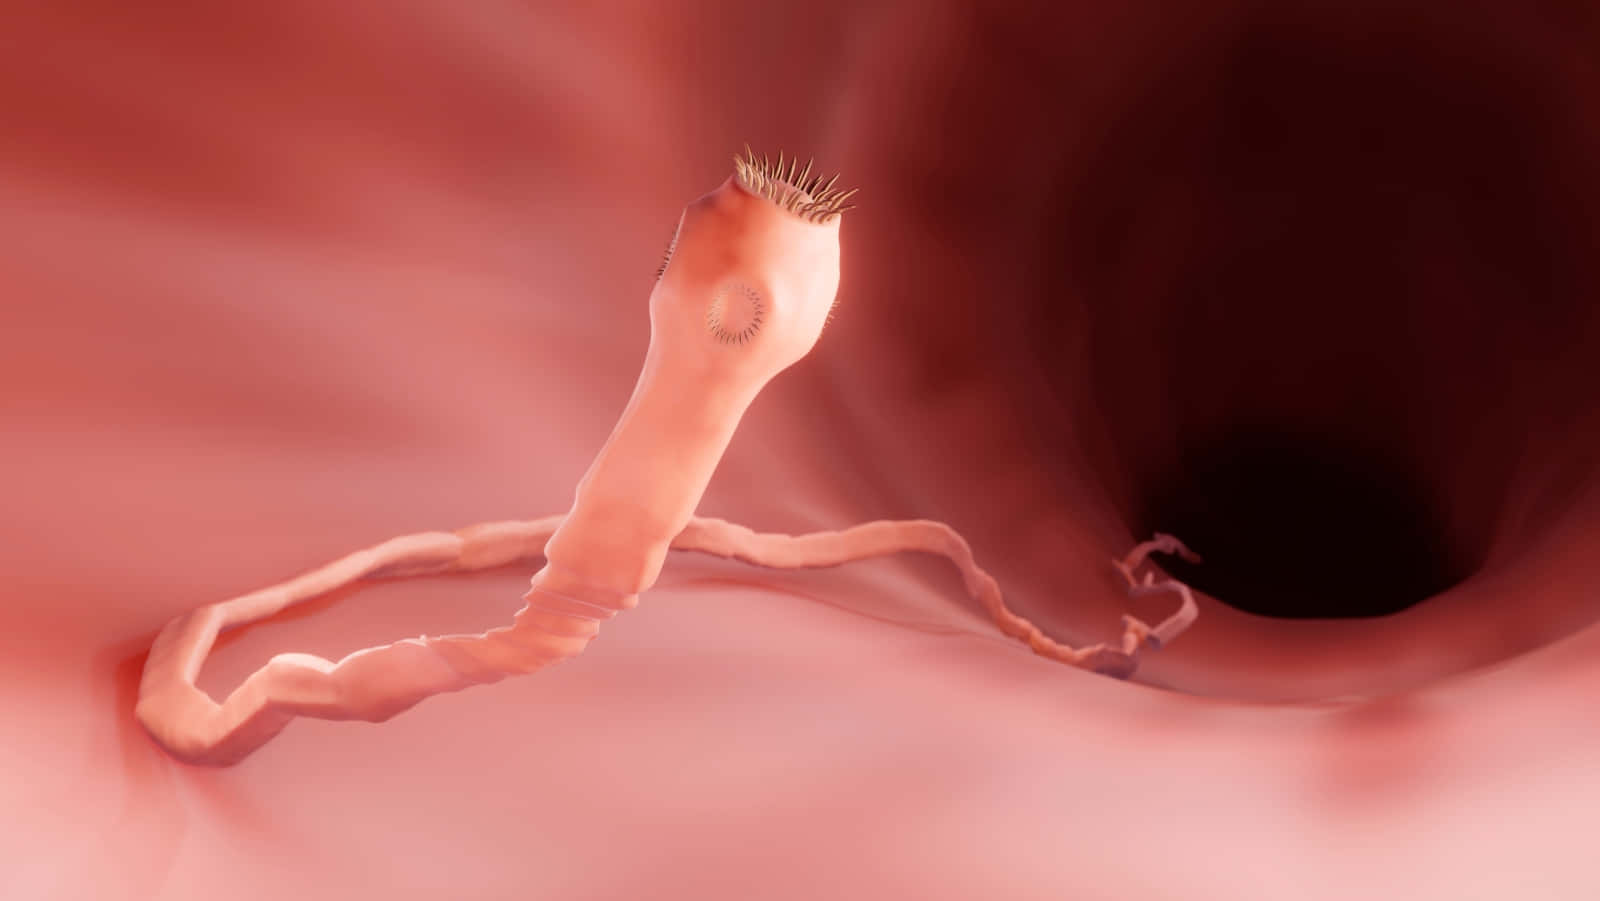 Tapeworm Infection Close Up View Wallpaper